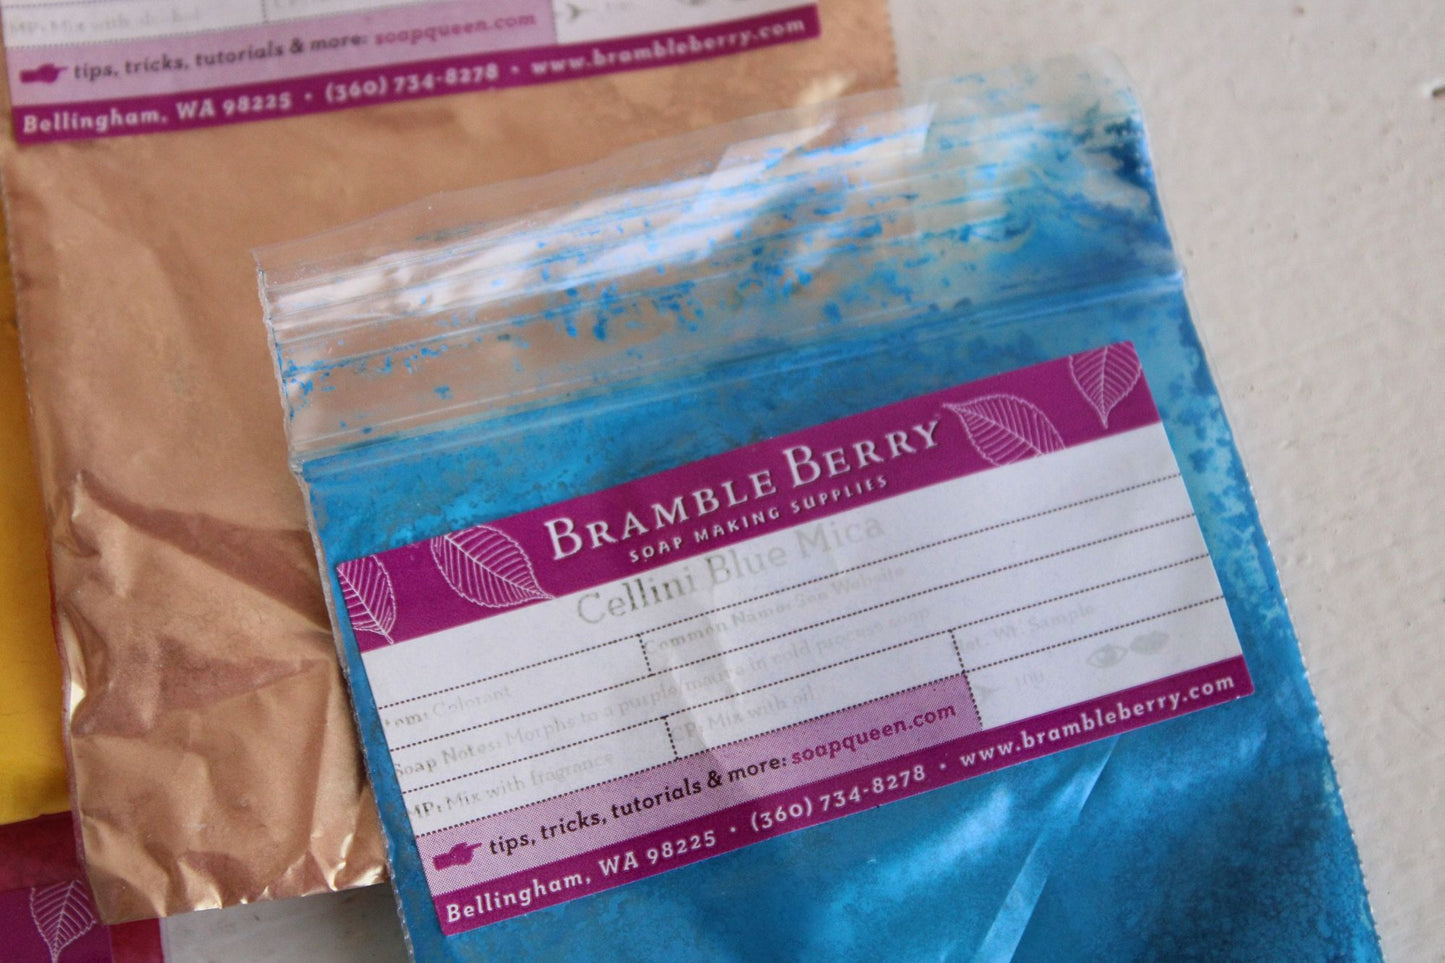 Lot of Mica Powders, By Bramble Berry, For Soap, Resin, Bath and Body and More, Sample Packs